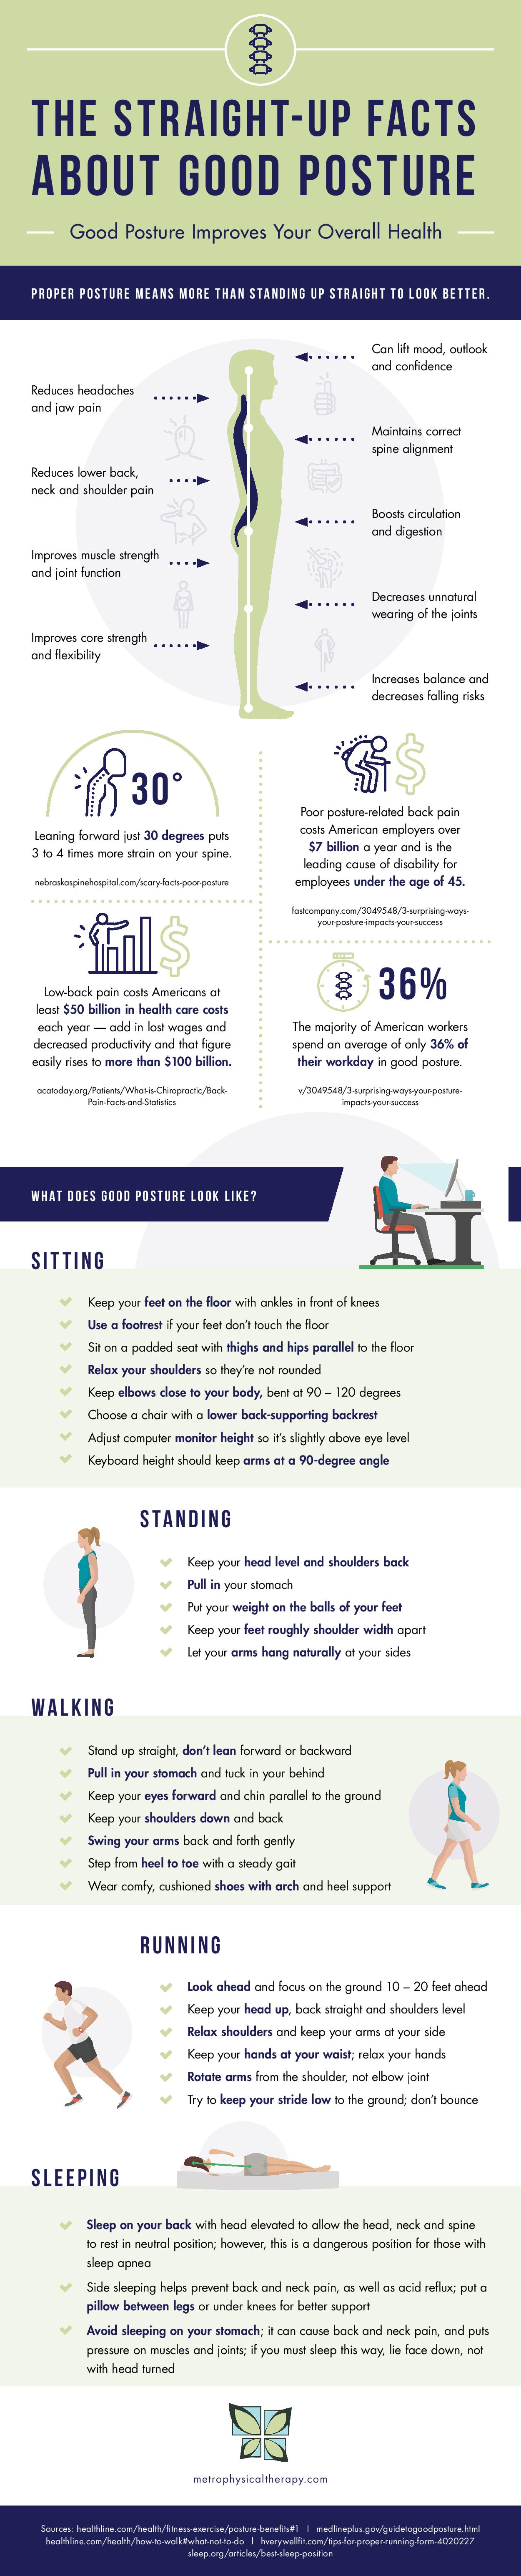 Smart Break  The Straight-Up Facts About Good Posture